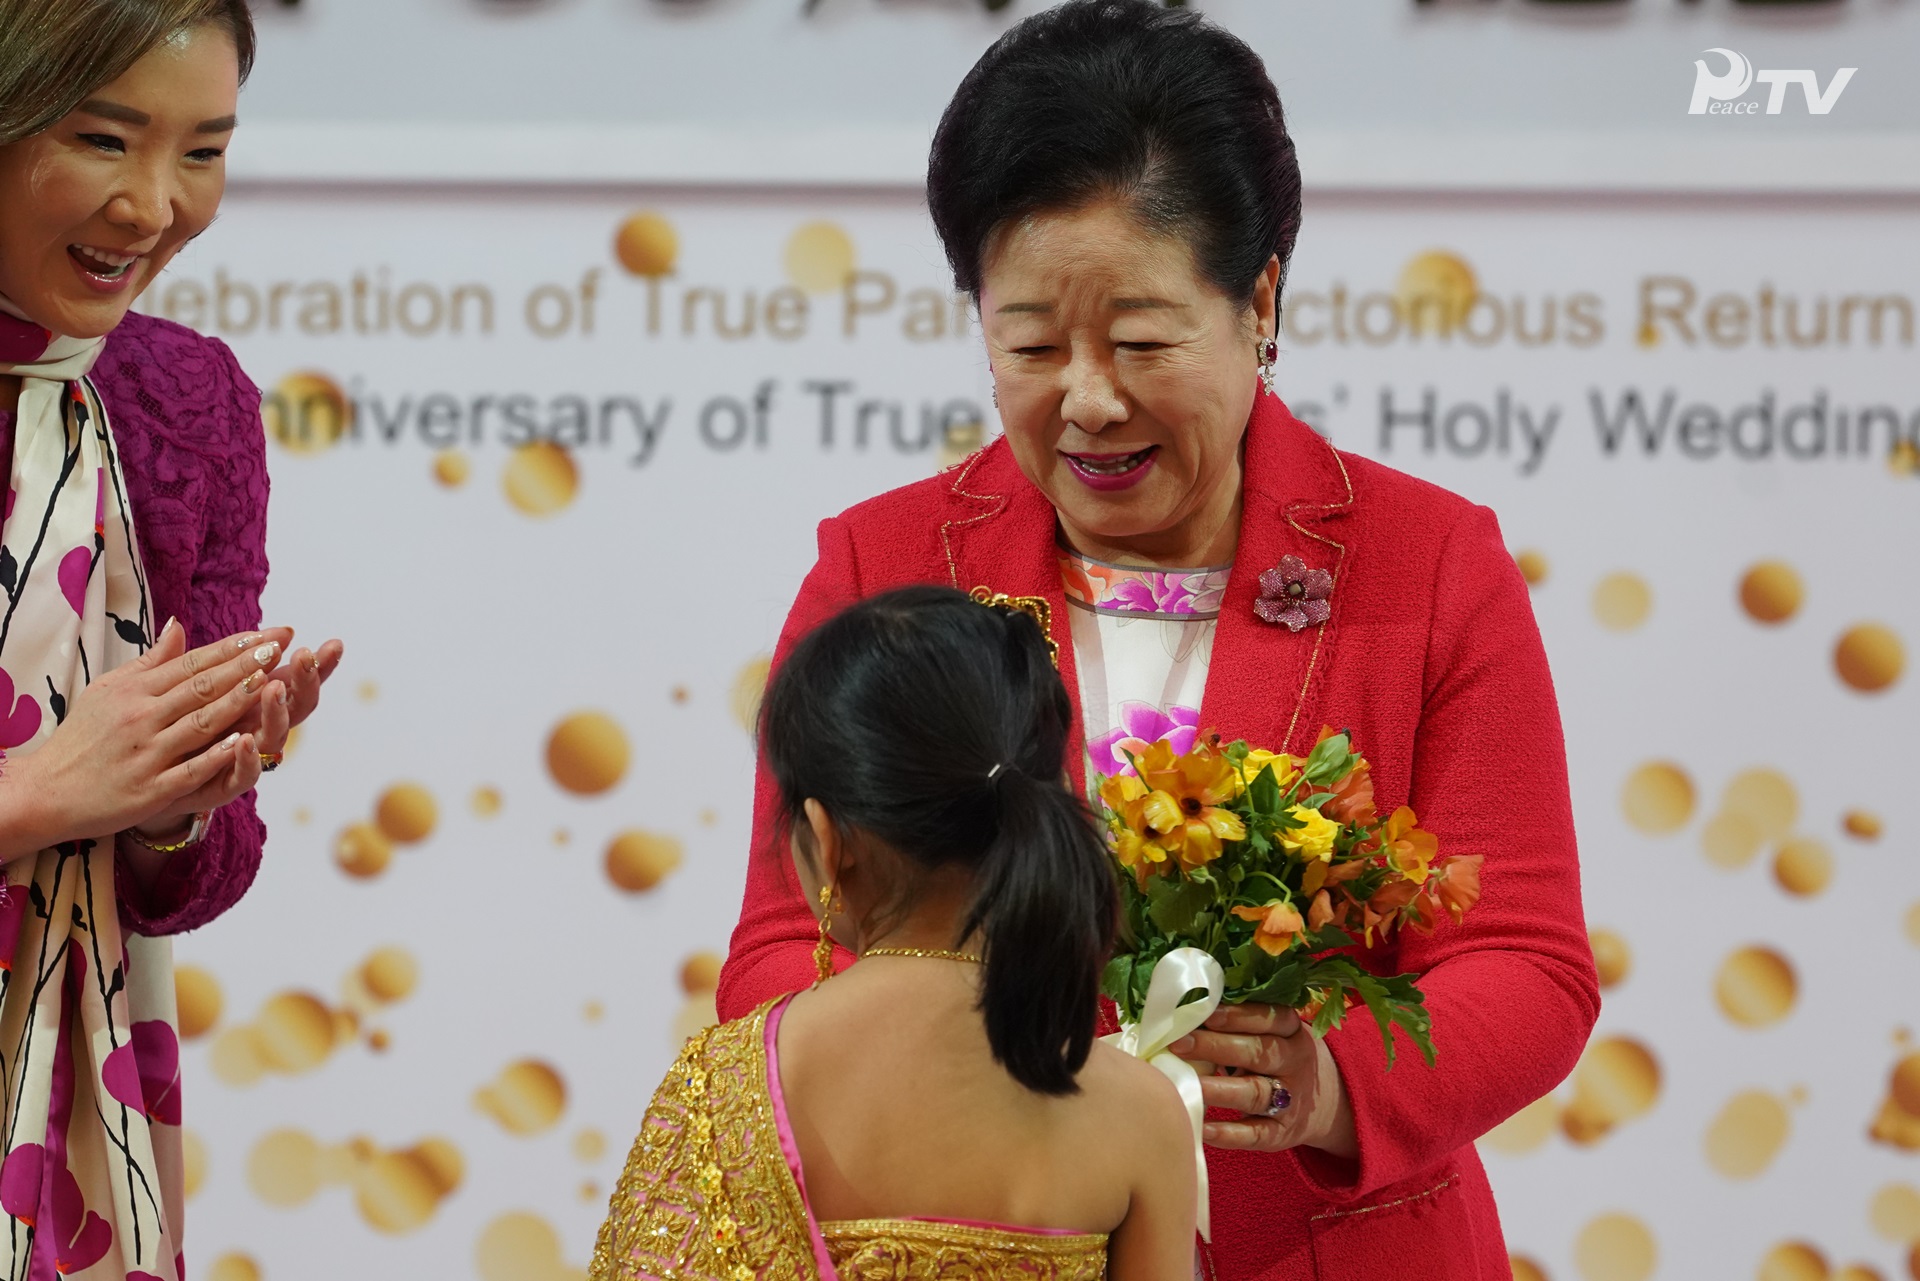 The Celebration of True Parents’ Victorious Return and the 59th Anniversary of True Parents’ Holy Wedding (2019.4.20)